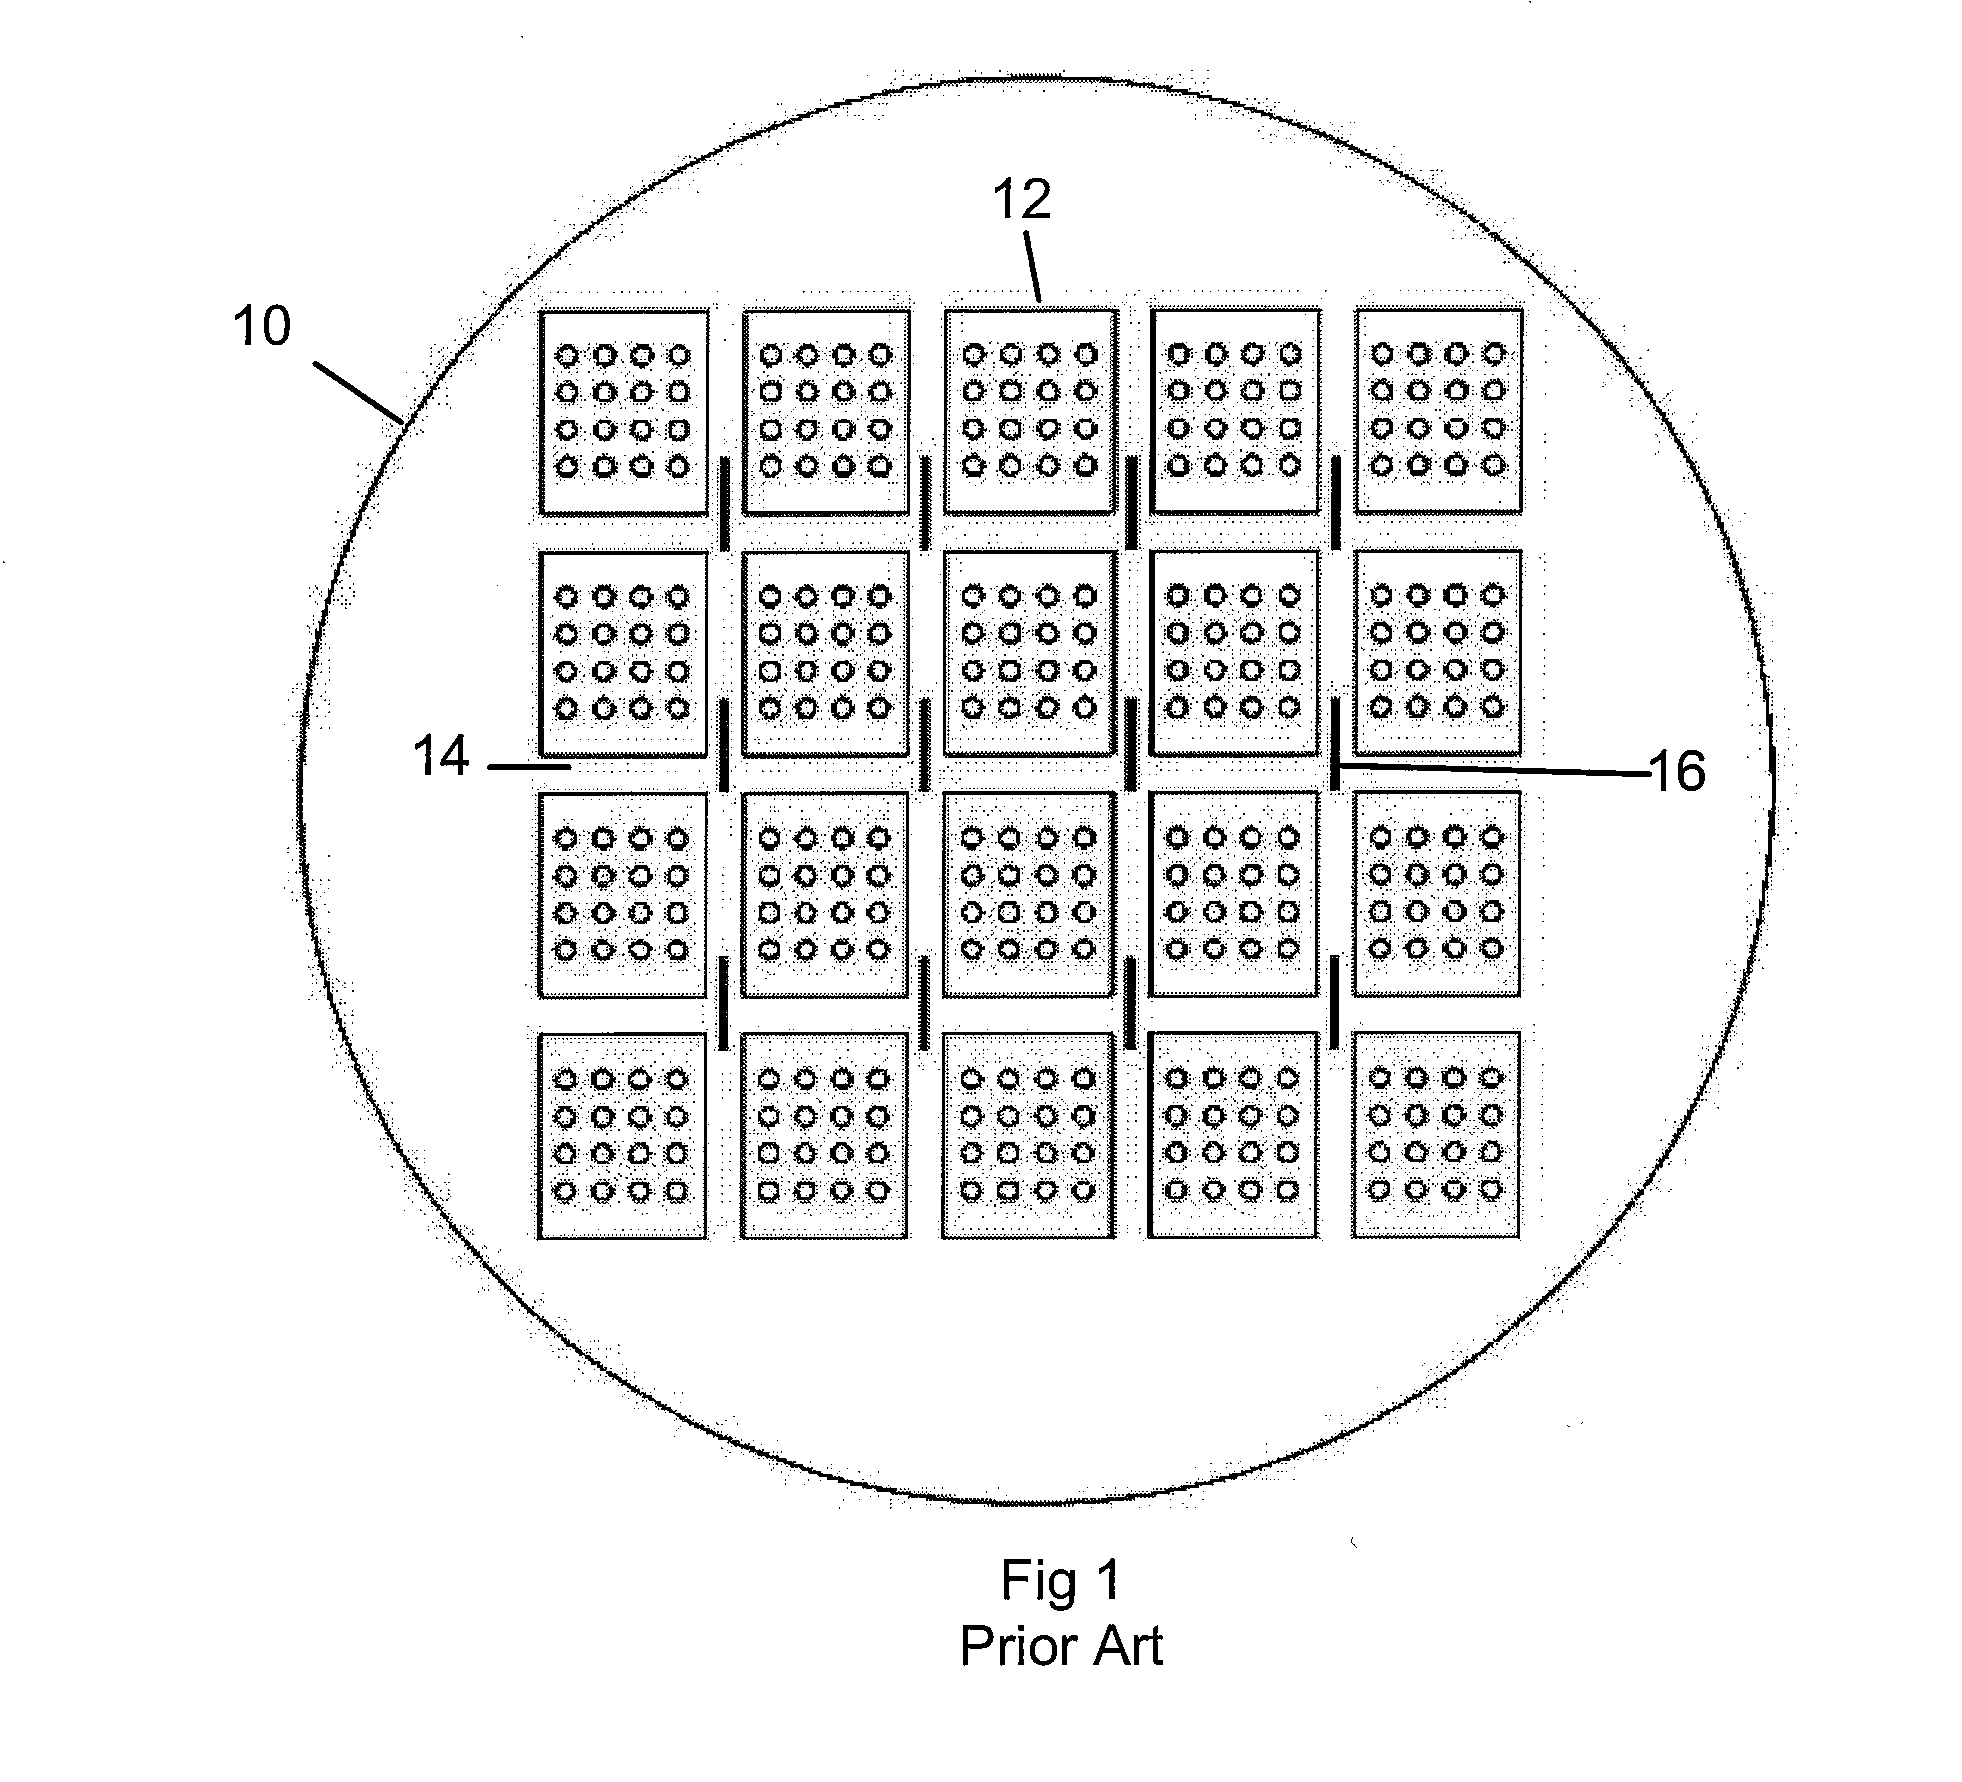 Method for Laser Singulation of Chip Scale Packages on Glass Substrates